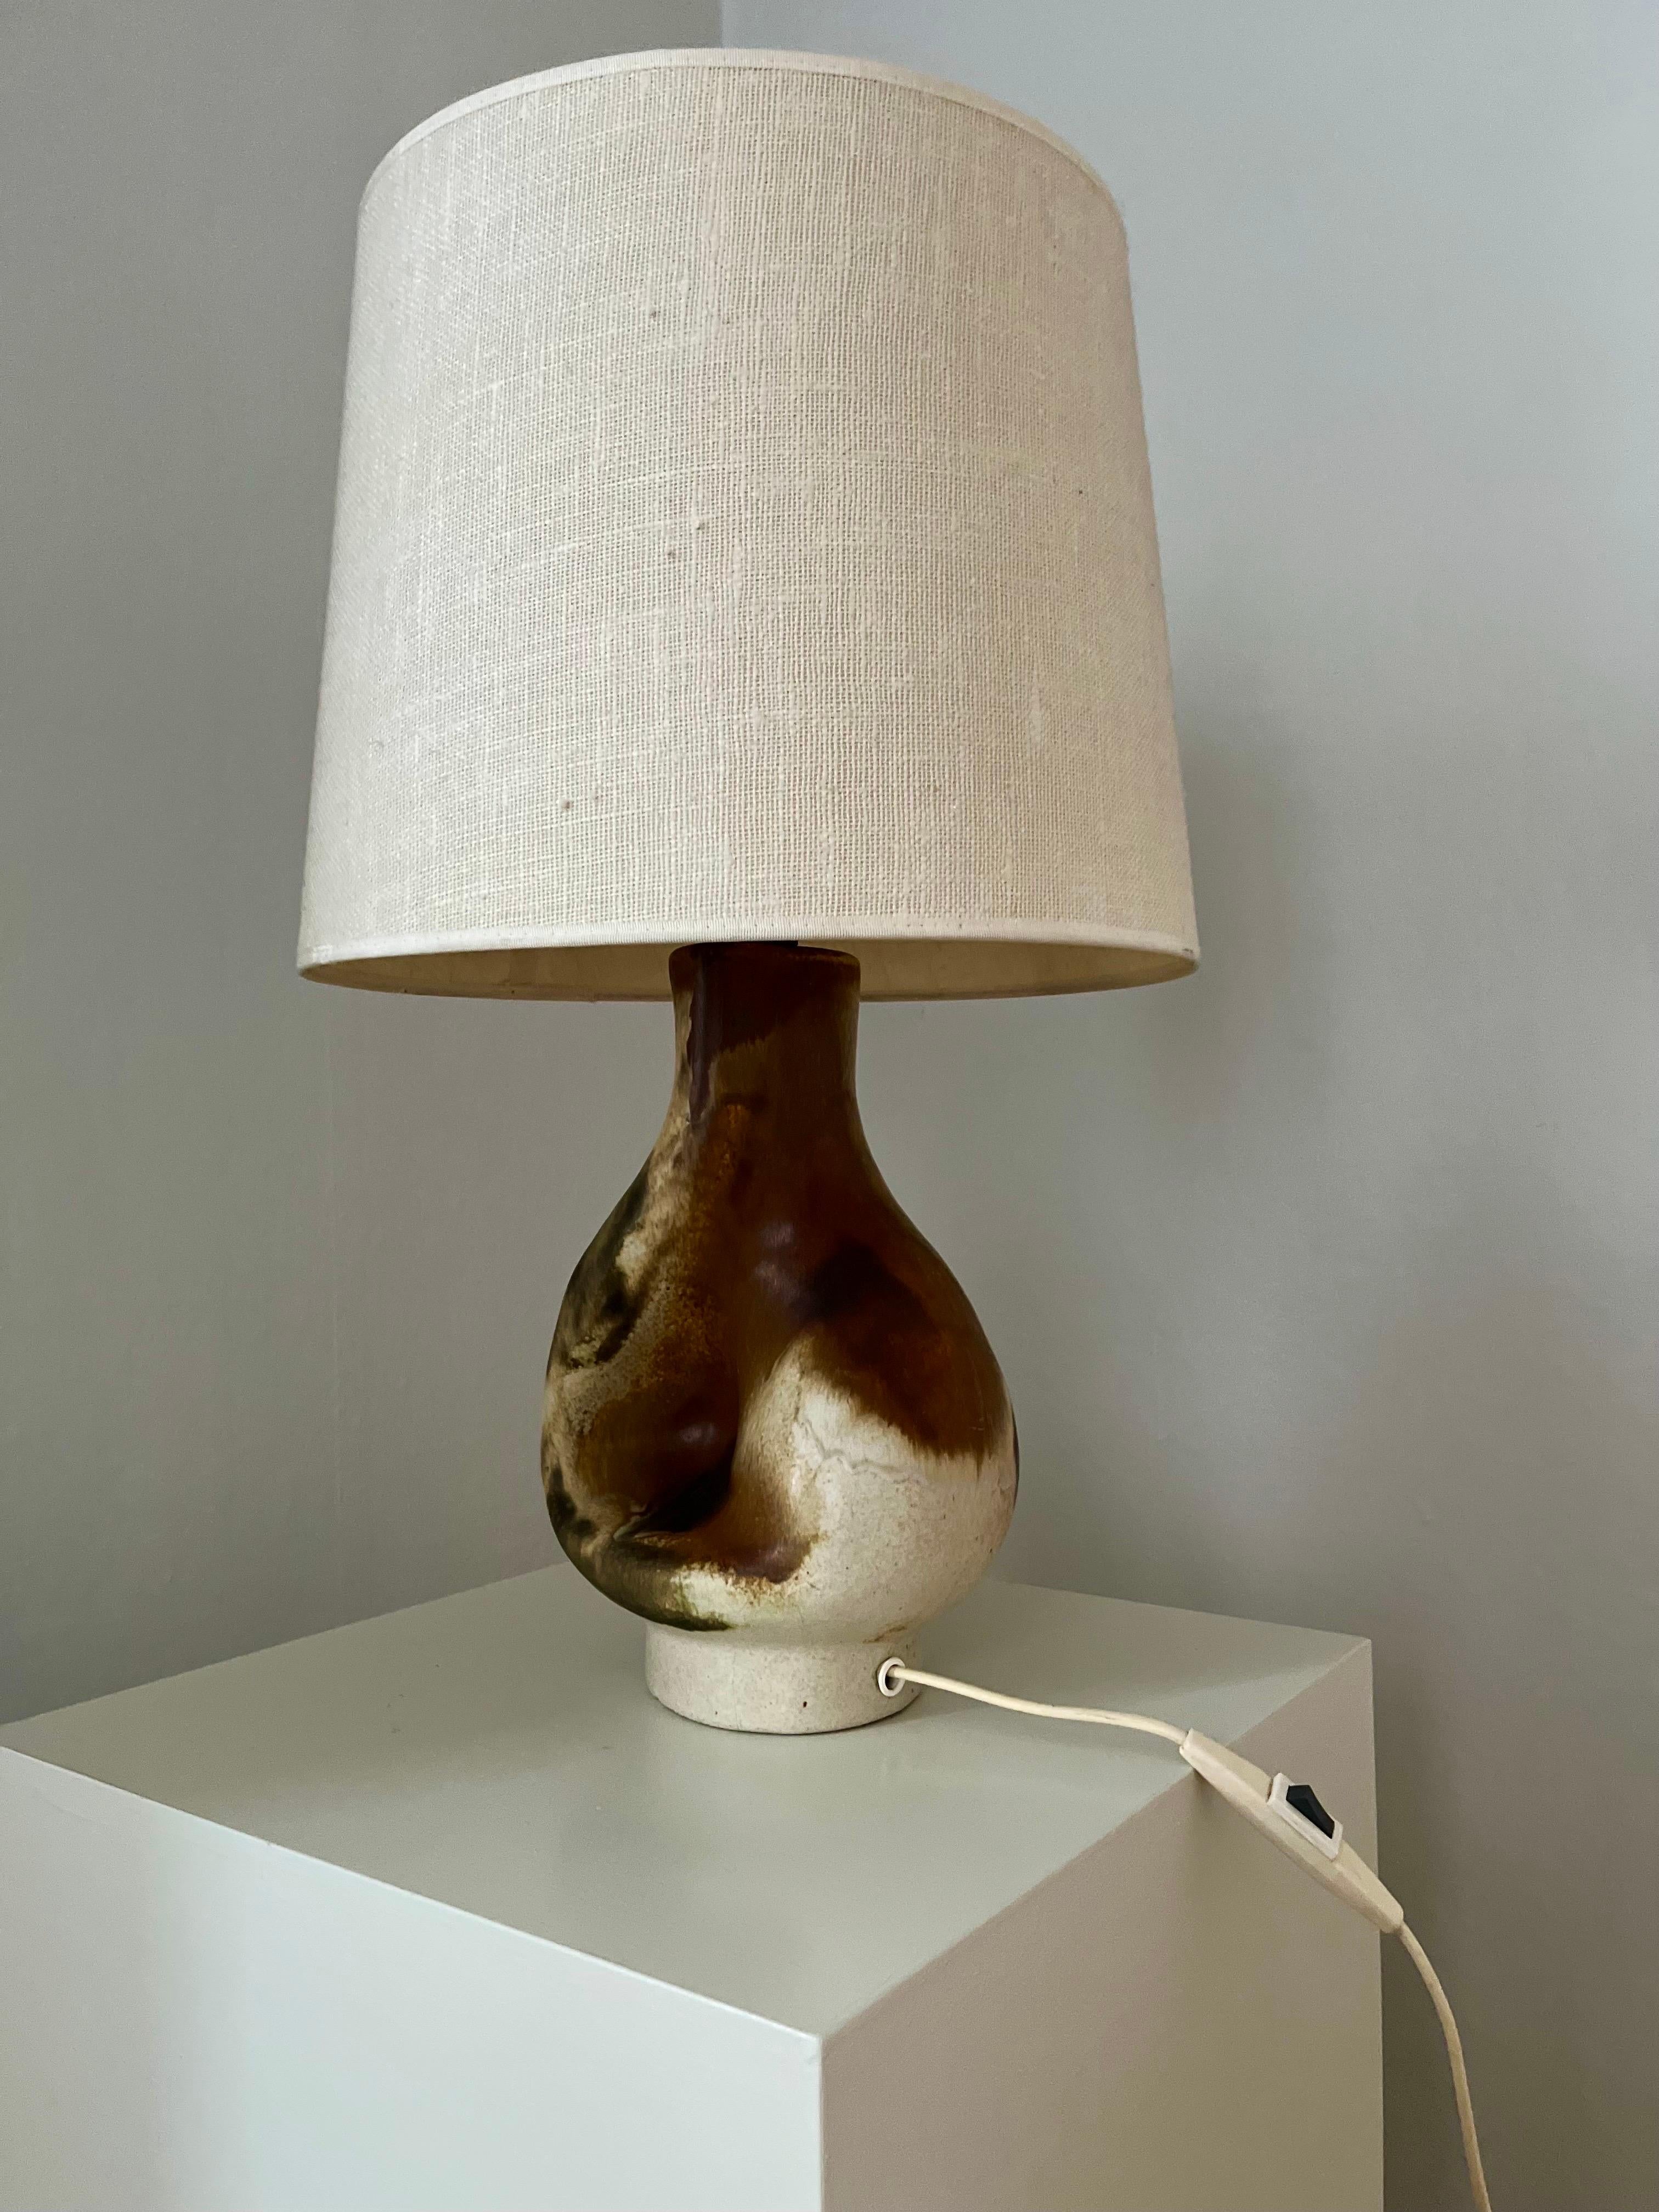 Scandinavian Modern sculptural stoneware table lamp by Danish Axella 1960s. 
This organic shaped, rustic and sculptural, almost deconstructed table lamp was made by Danish manufacturer Axella Stentøj in the 1960s. Decorations in nuances of brown.